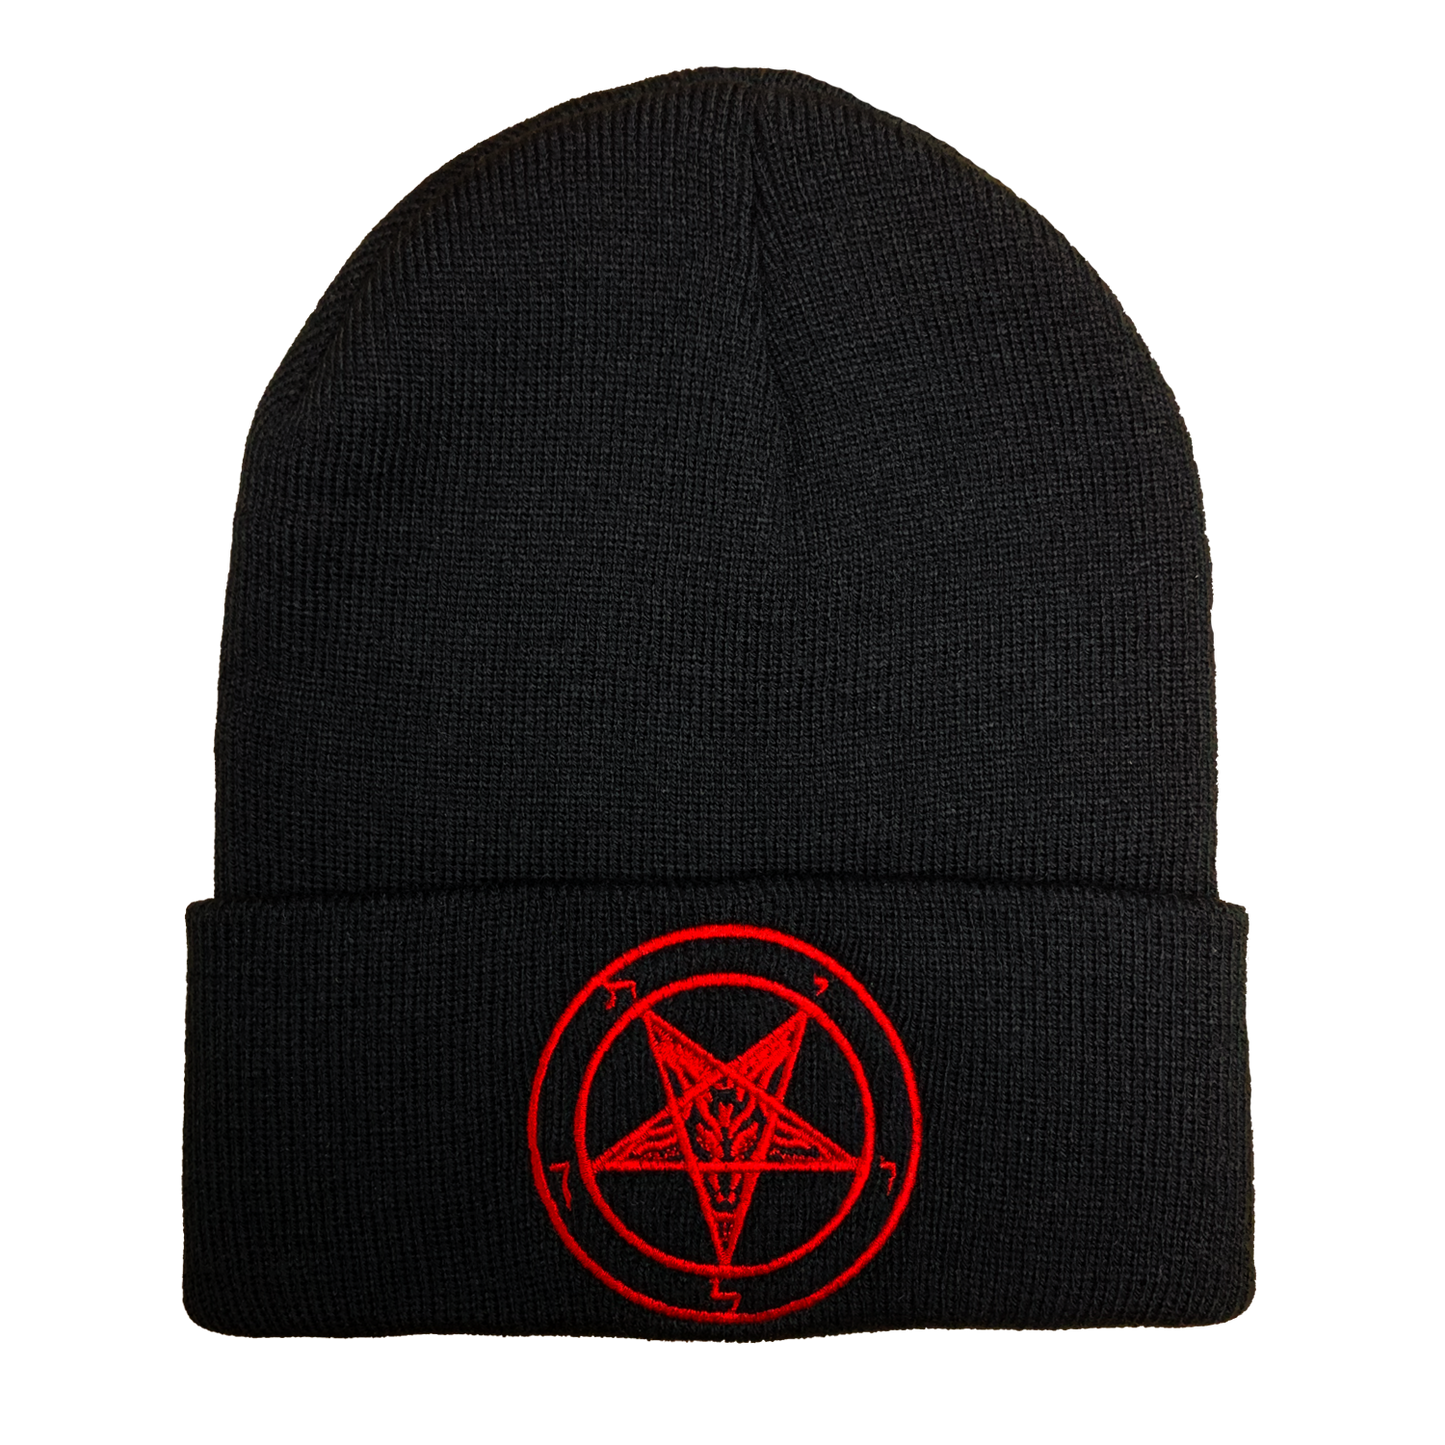 Pentagram Embroidered Beanie - UNMASKED Horror & Punk Patches and Decor